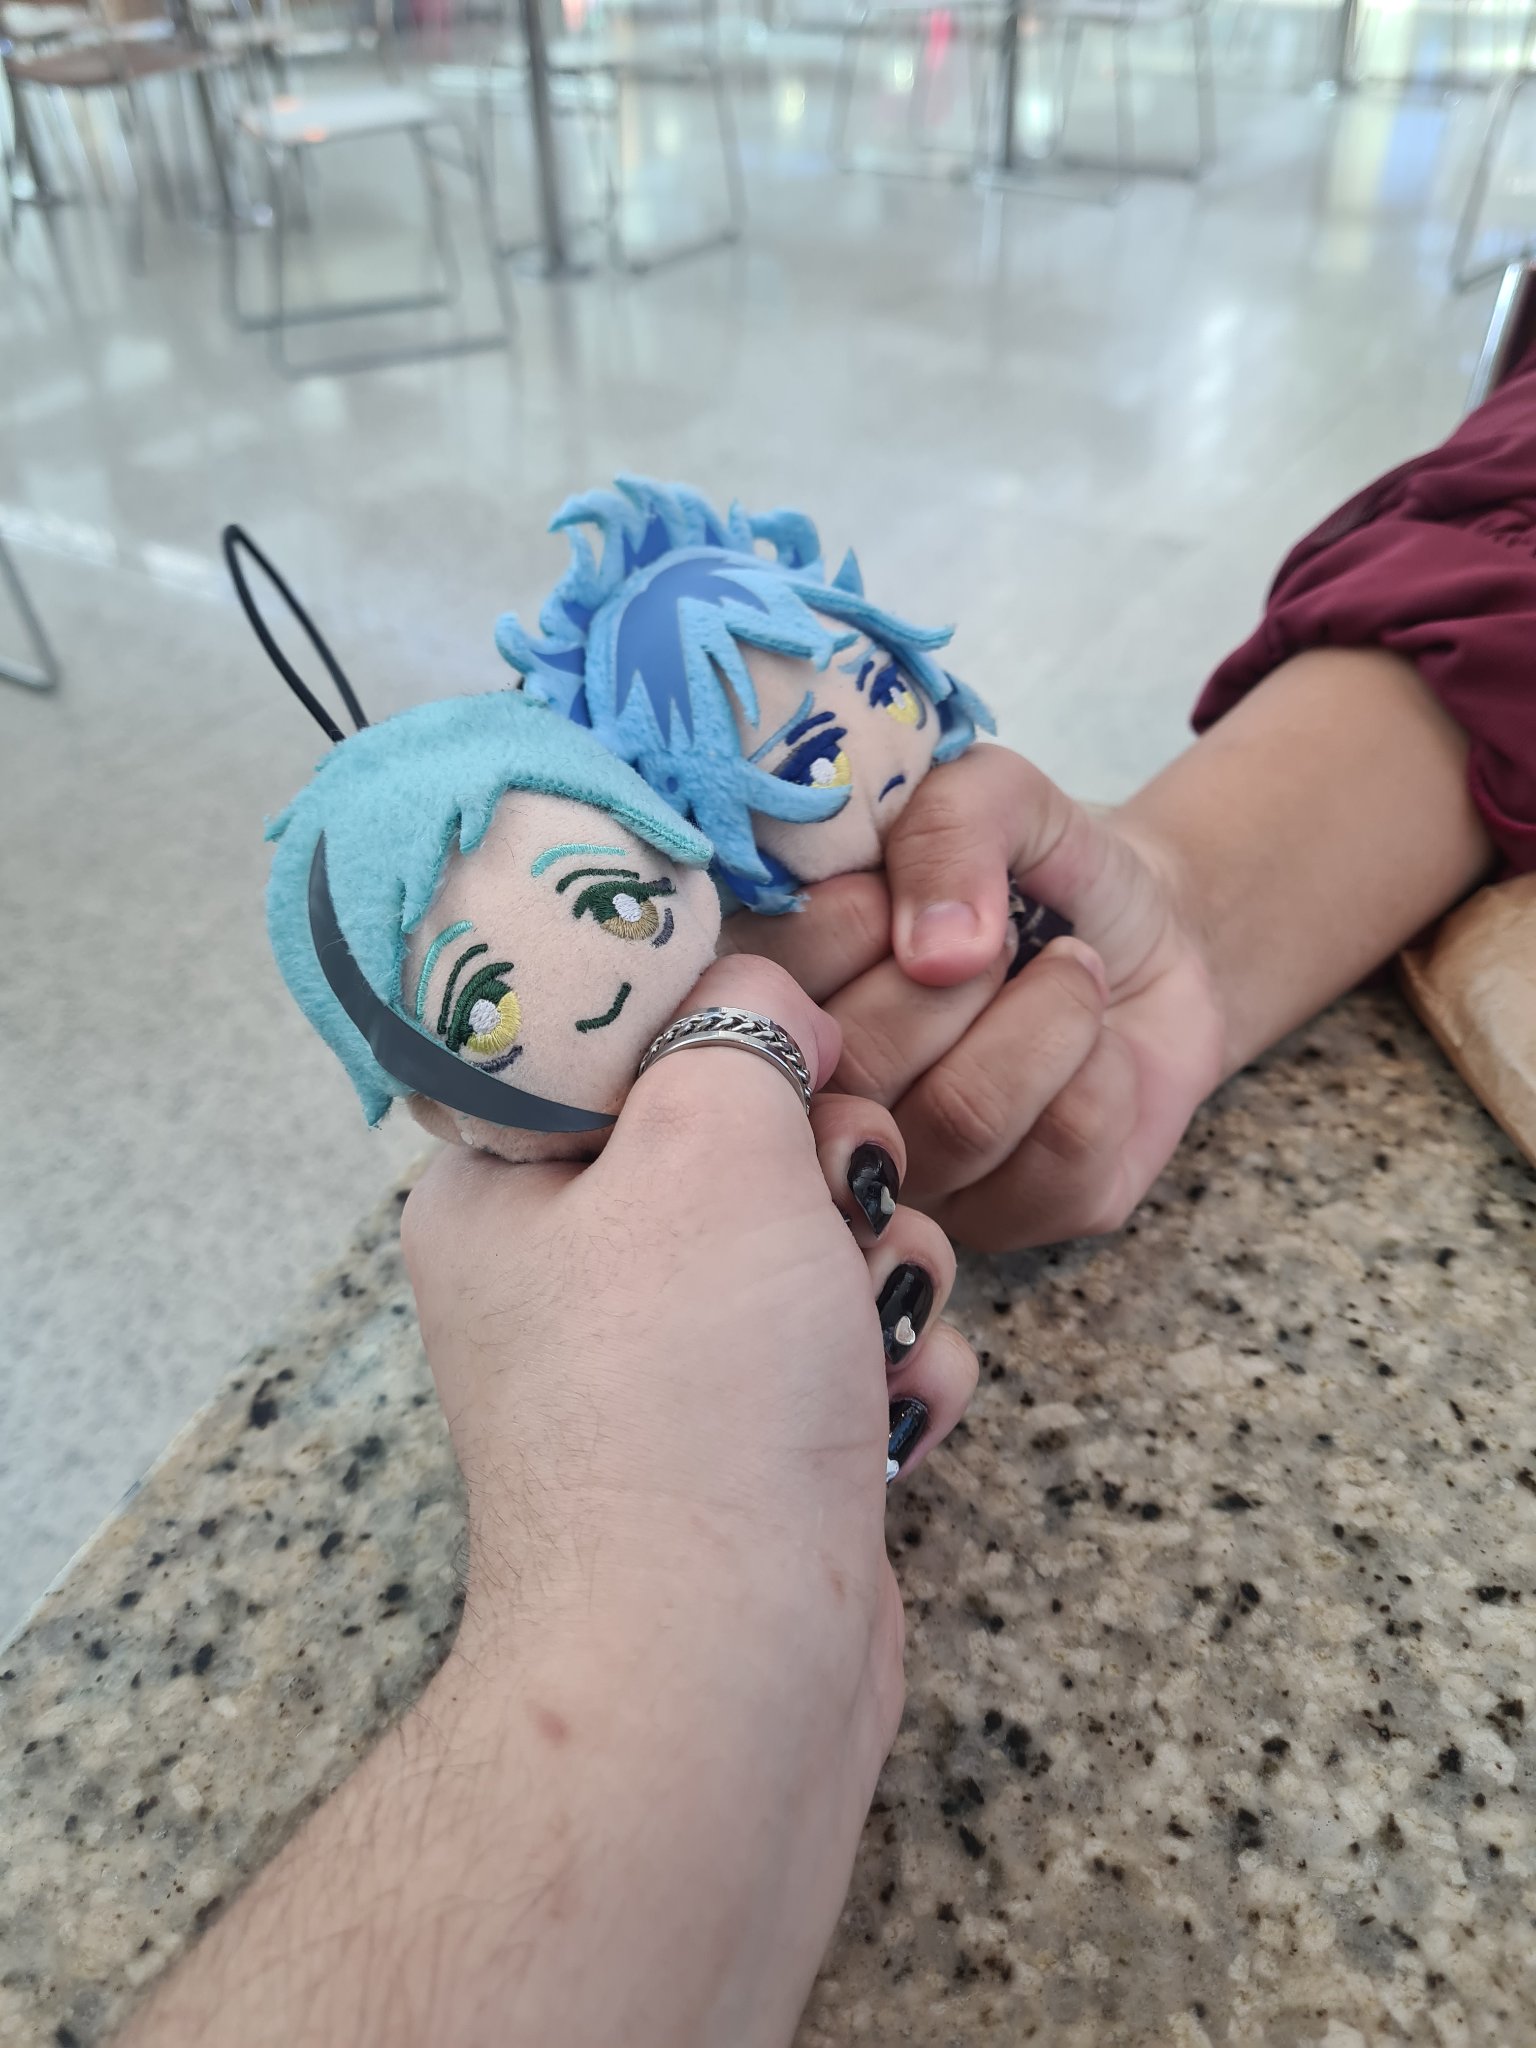 picture of me and my friend's hands, squishing two small plushies of our favorite 'twisted wonderland' characters.